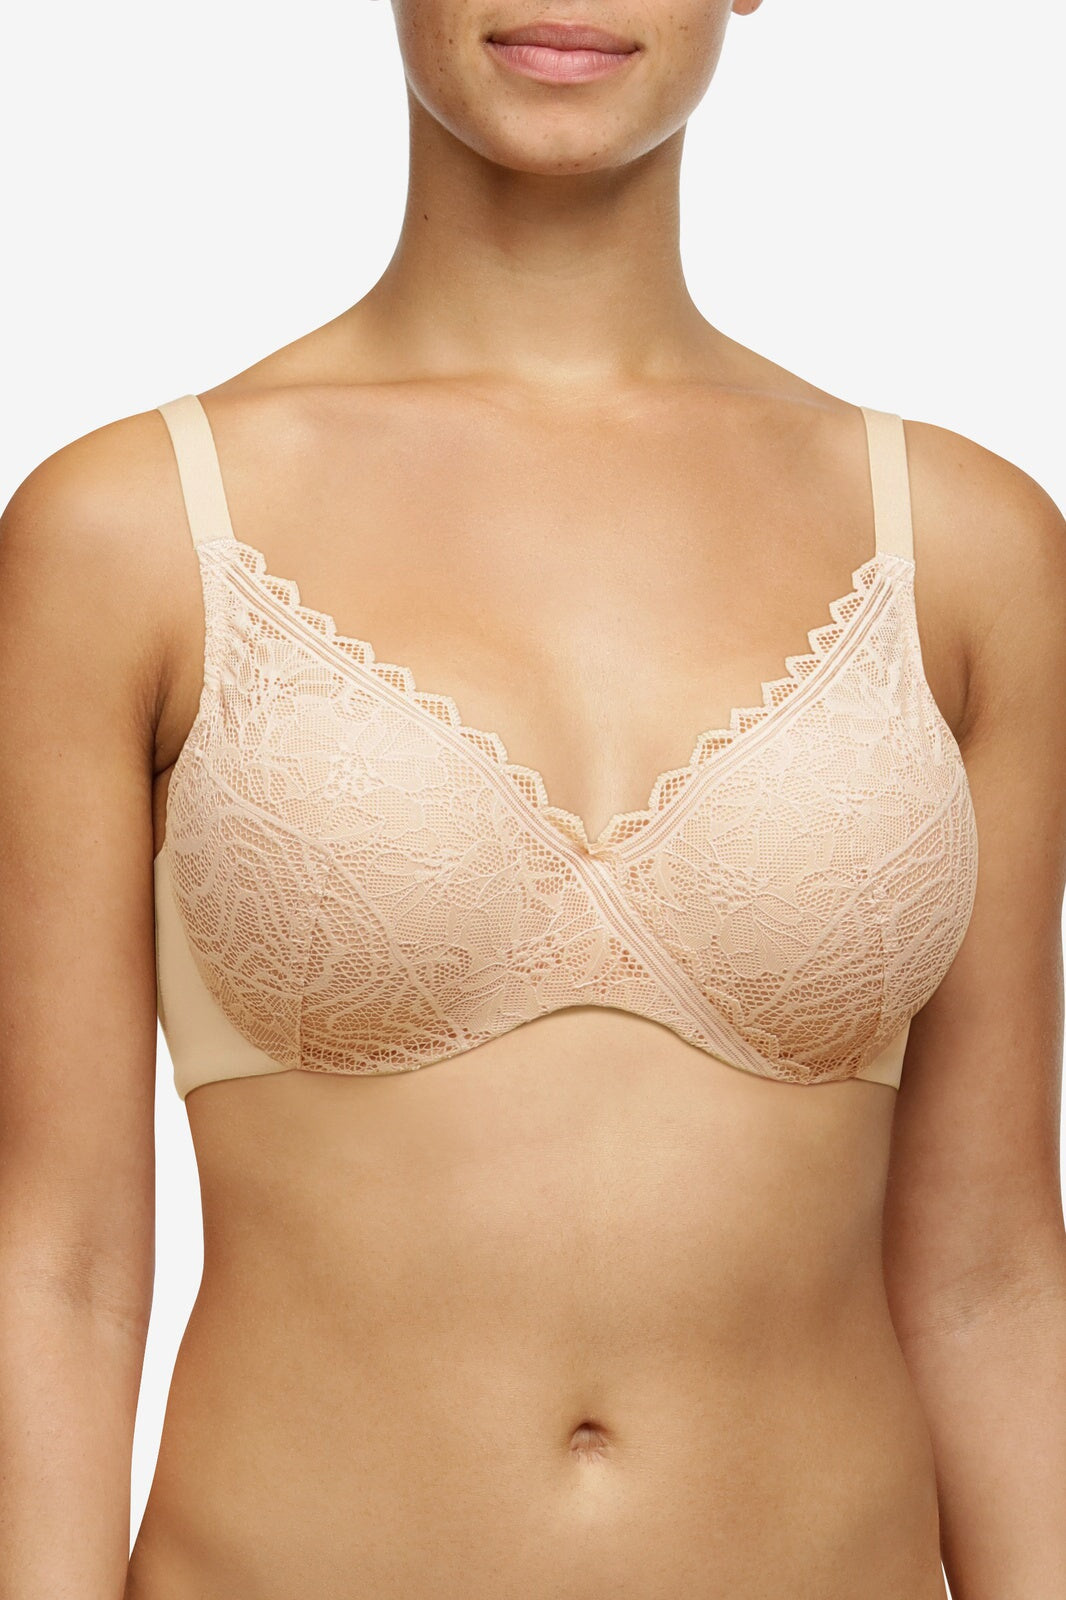 Chantelle Floral Touch Triangle Bra - Golden Beige Triangle Bra Chantelle 